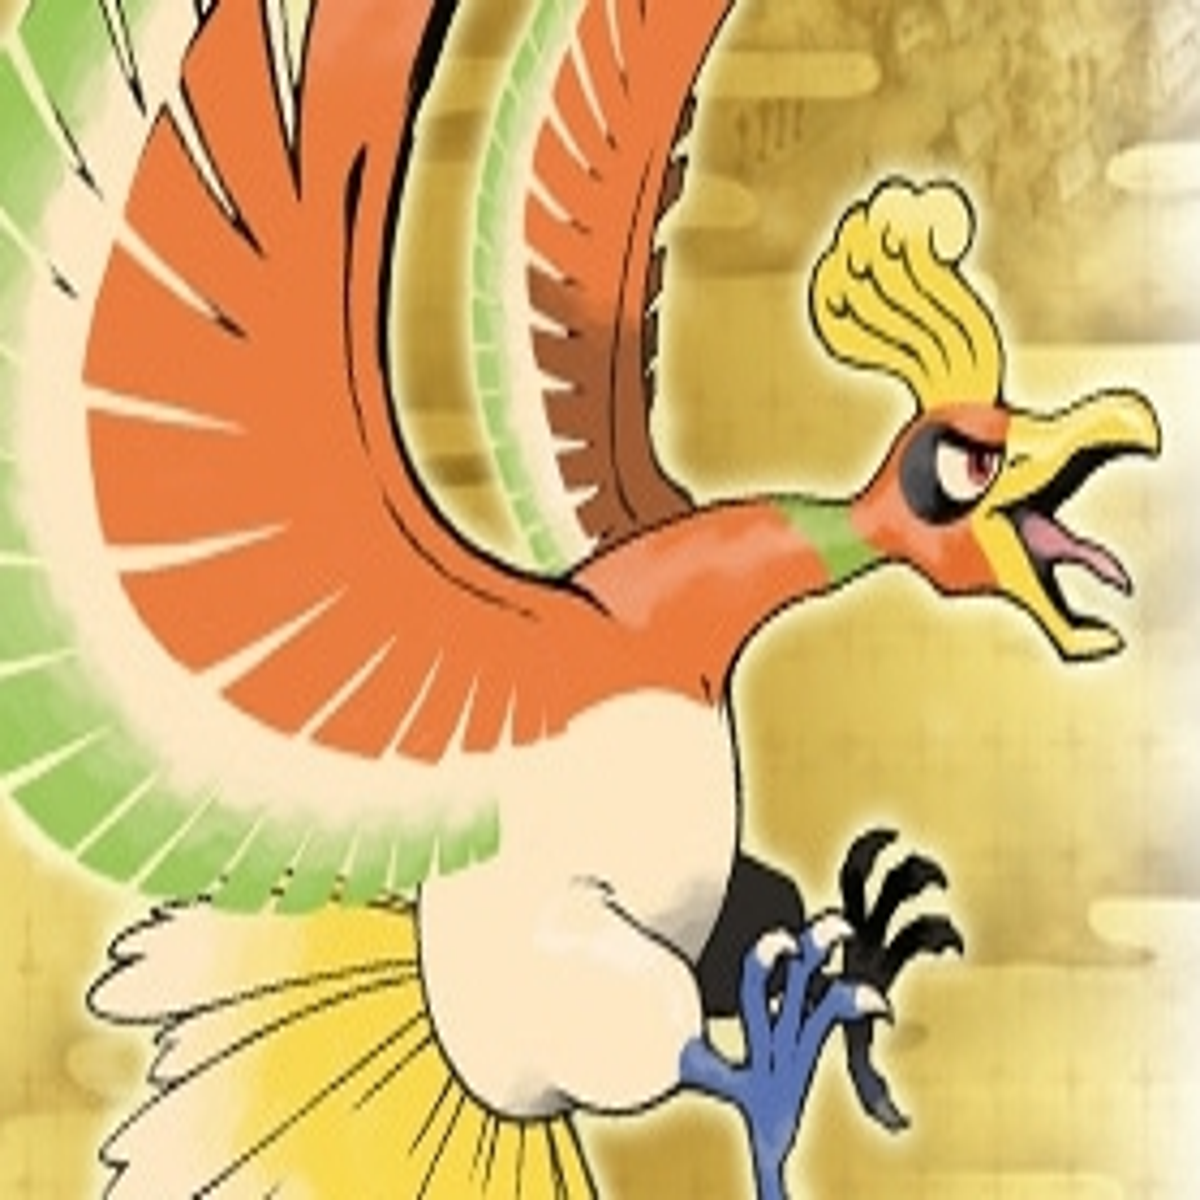 Pokémon Go just released Ho-oh in a surprise new legendary raid